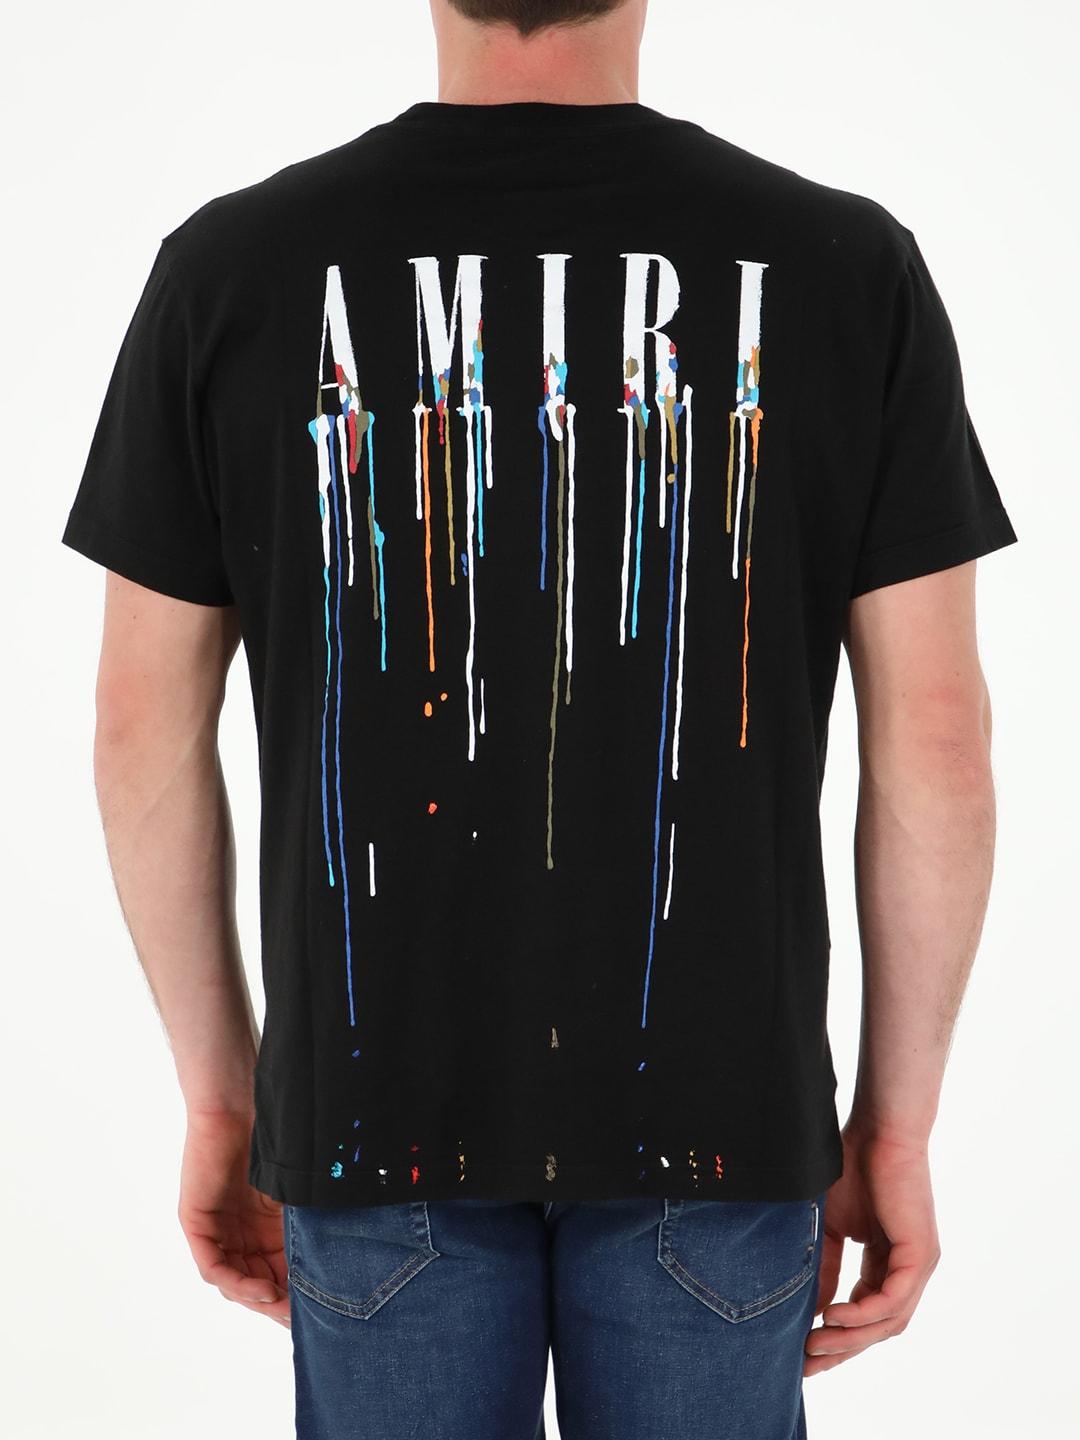 Amiri Paint Drip on White shirt T-Shirt Mens Size M- New with Tags